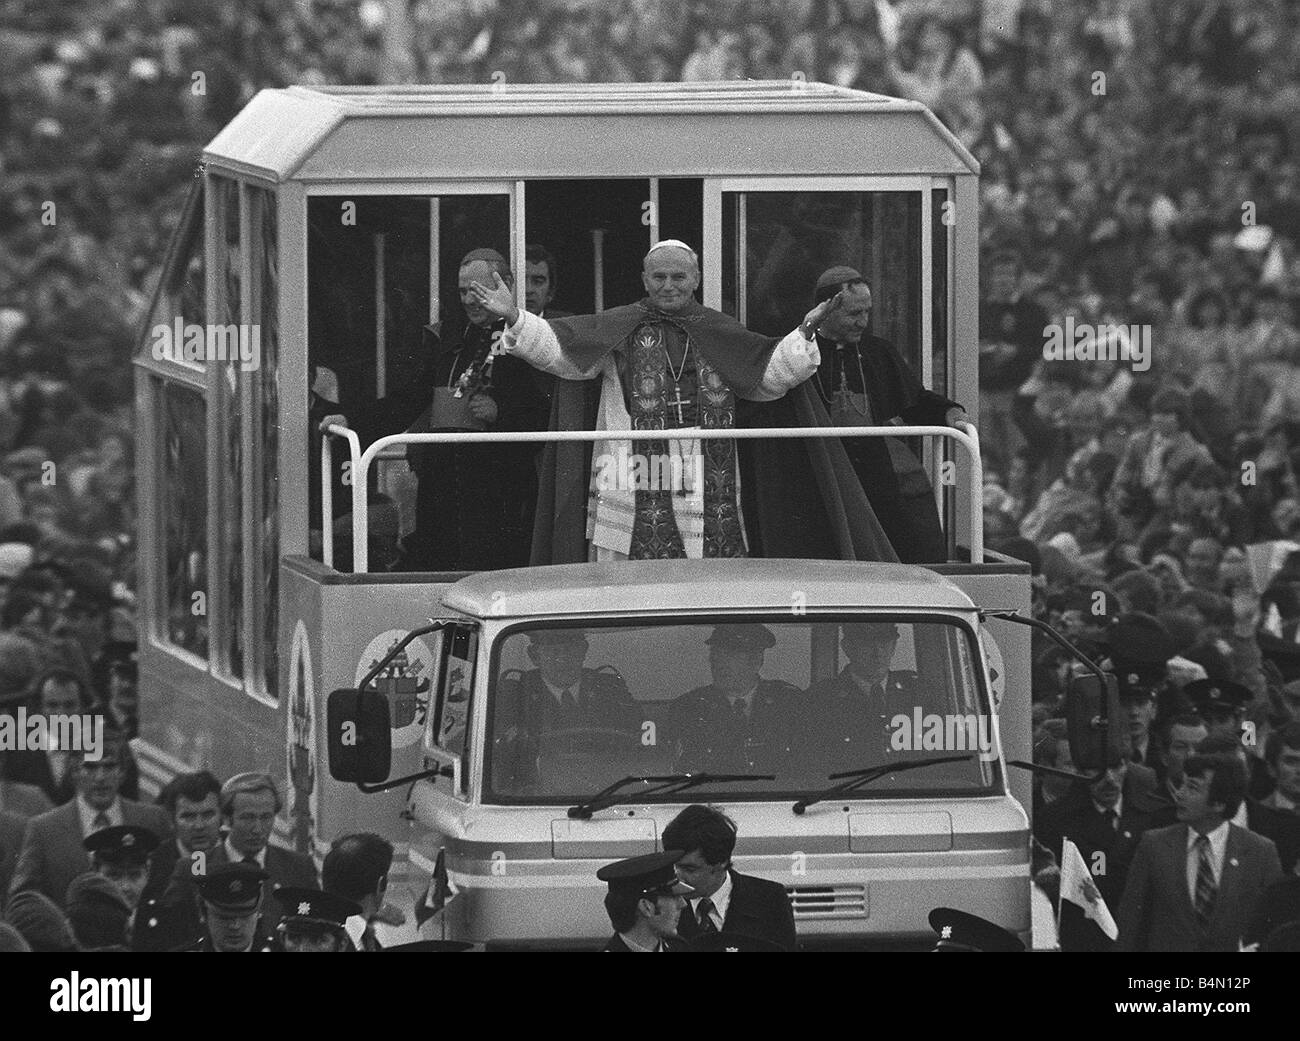 Pope John Paul II gives a blessing from his popemobile during his visit to ireland Stock Photo